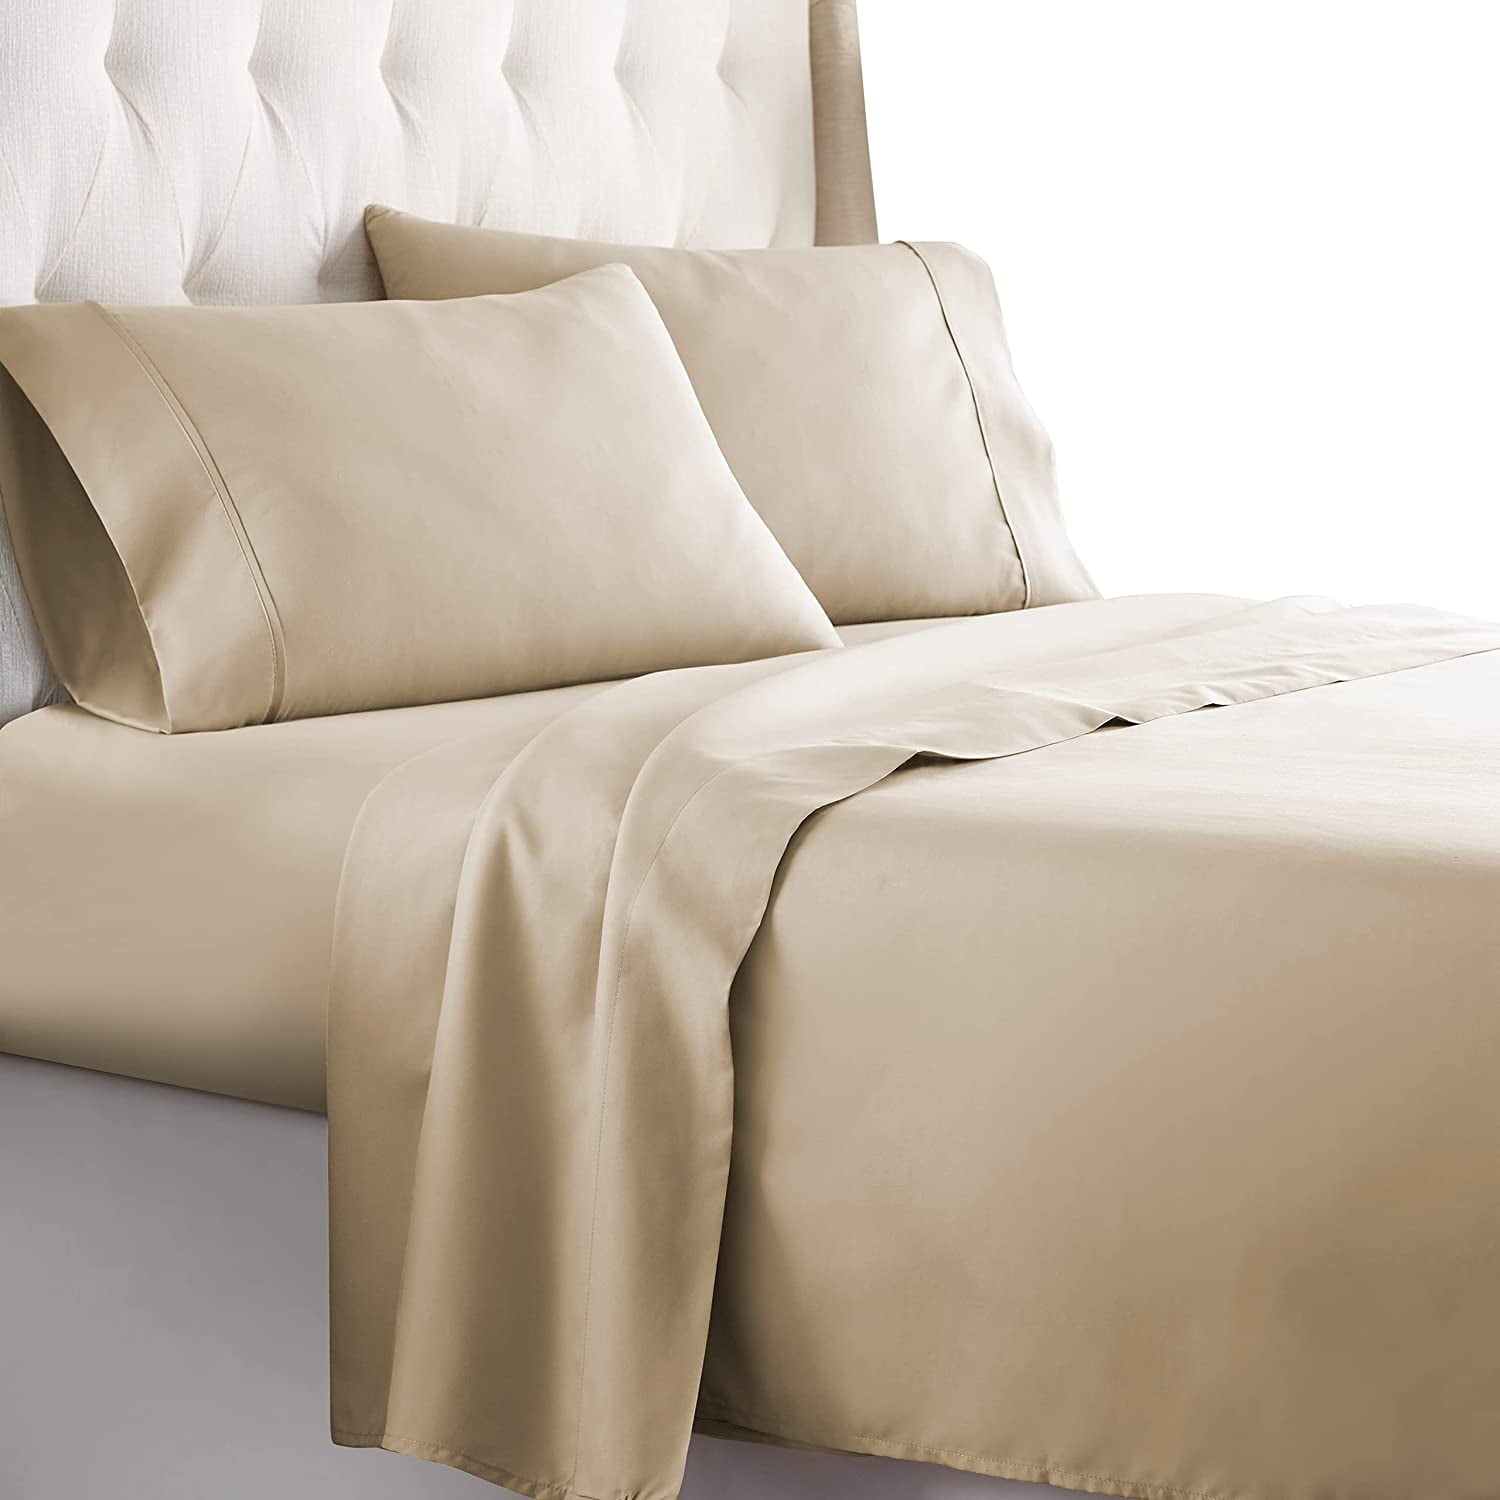 Details about   1800Count Hotel Quality 3/4 Piece Deep Pocket Bed Sheet Set Home Soft Bedding US 